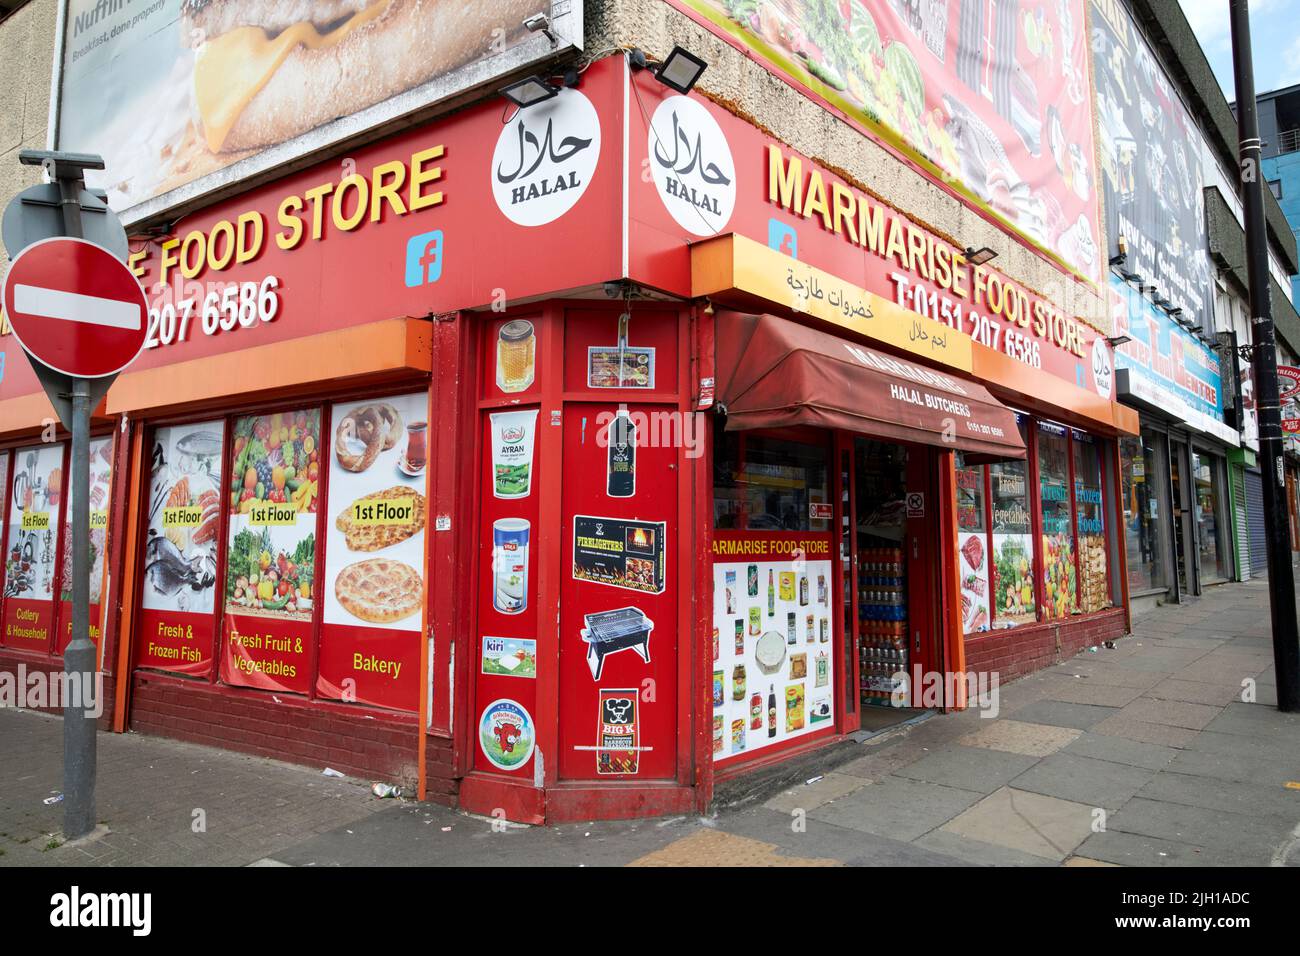 immigrant food stores and halal food shop london road Liverpool England UK Stock Photo